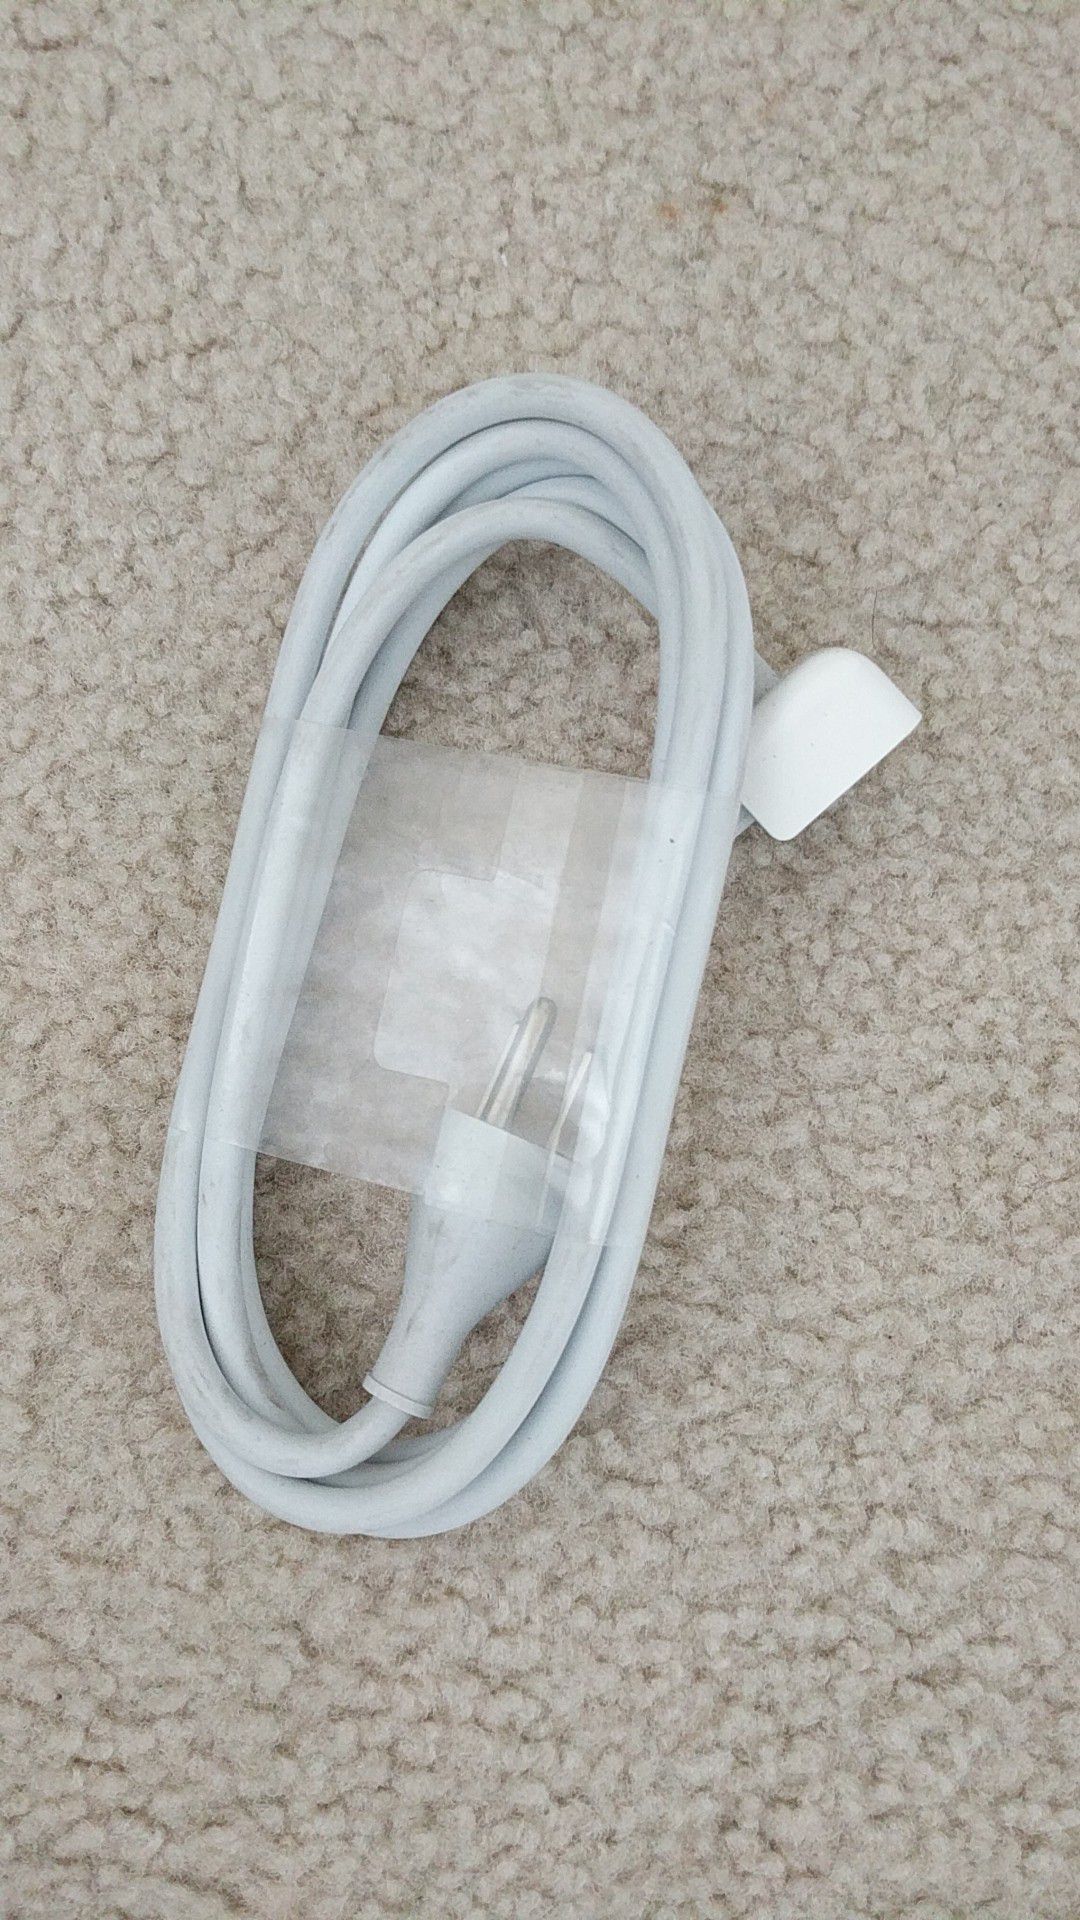 New Apple 6 ft extension cord